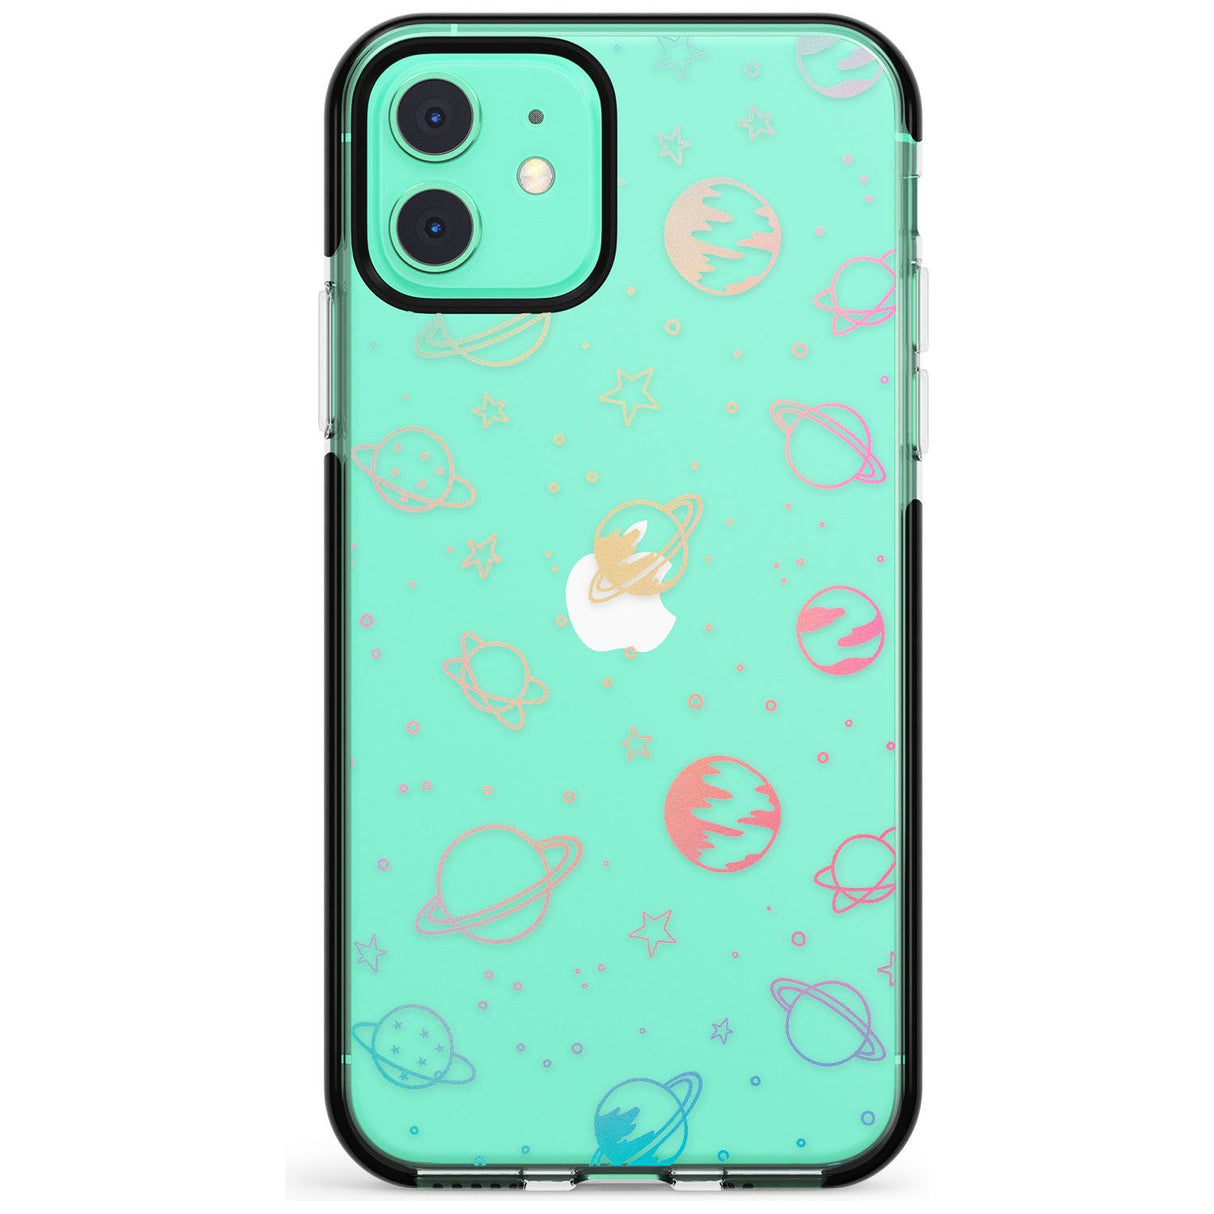 Outer Space Outlines: Pastels on Clear Pink Fade Impact Phone Case for iPhone 11 Pro Max